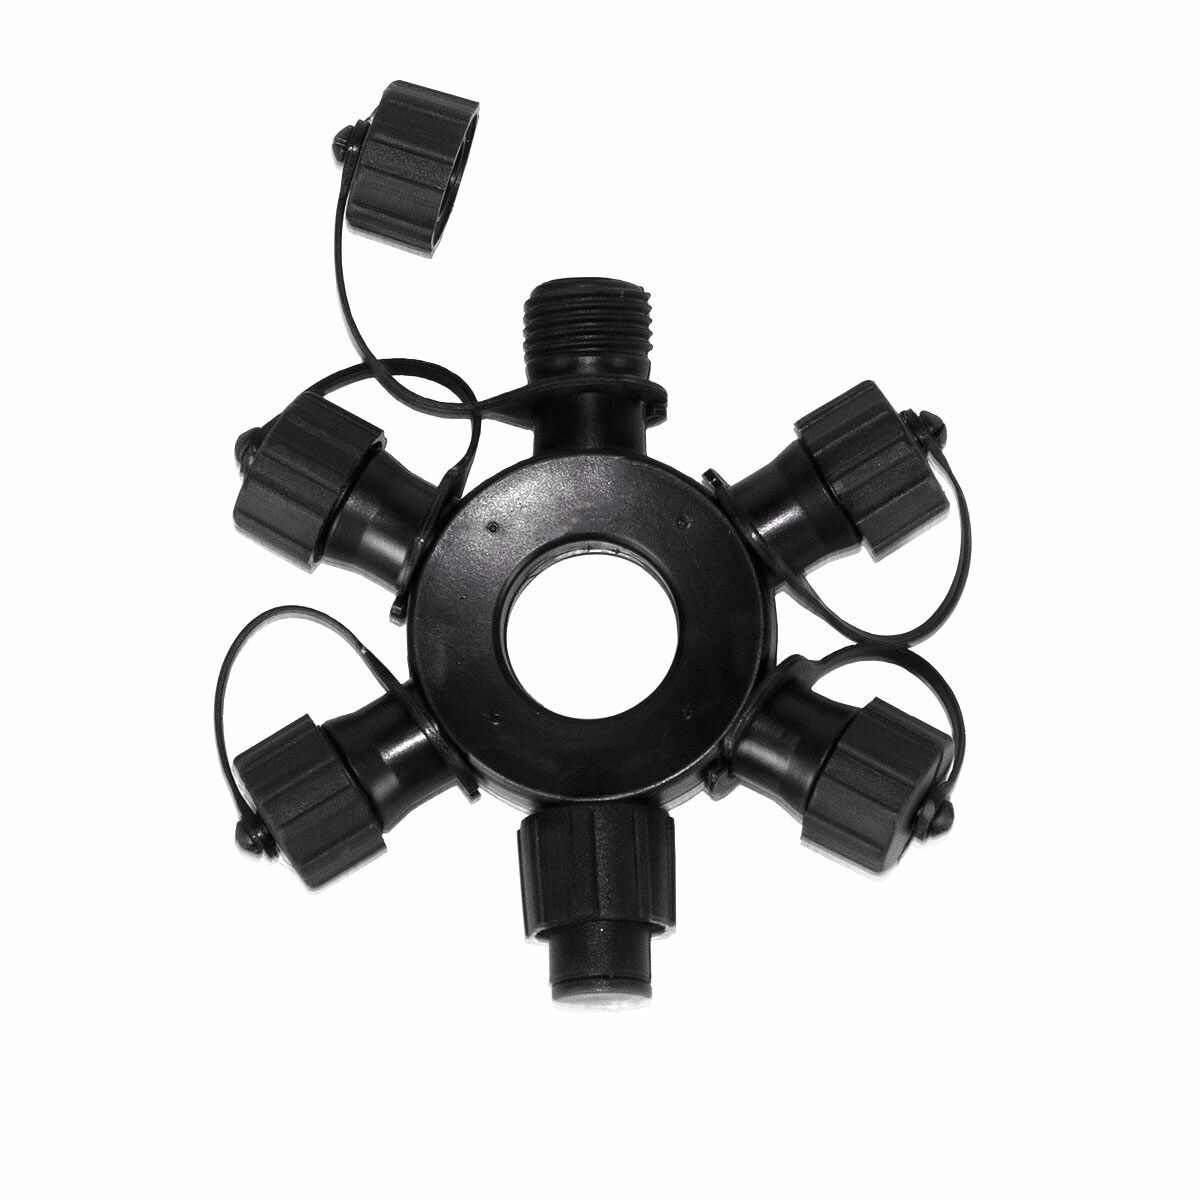 ConnectPro® 5 Port Ring Connector, Connectable, Black or White image 1